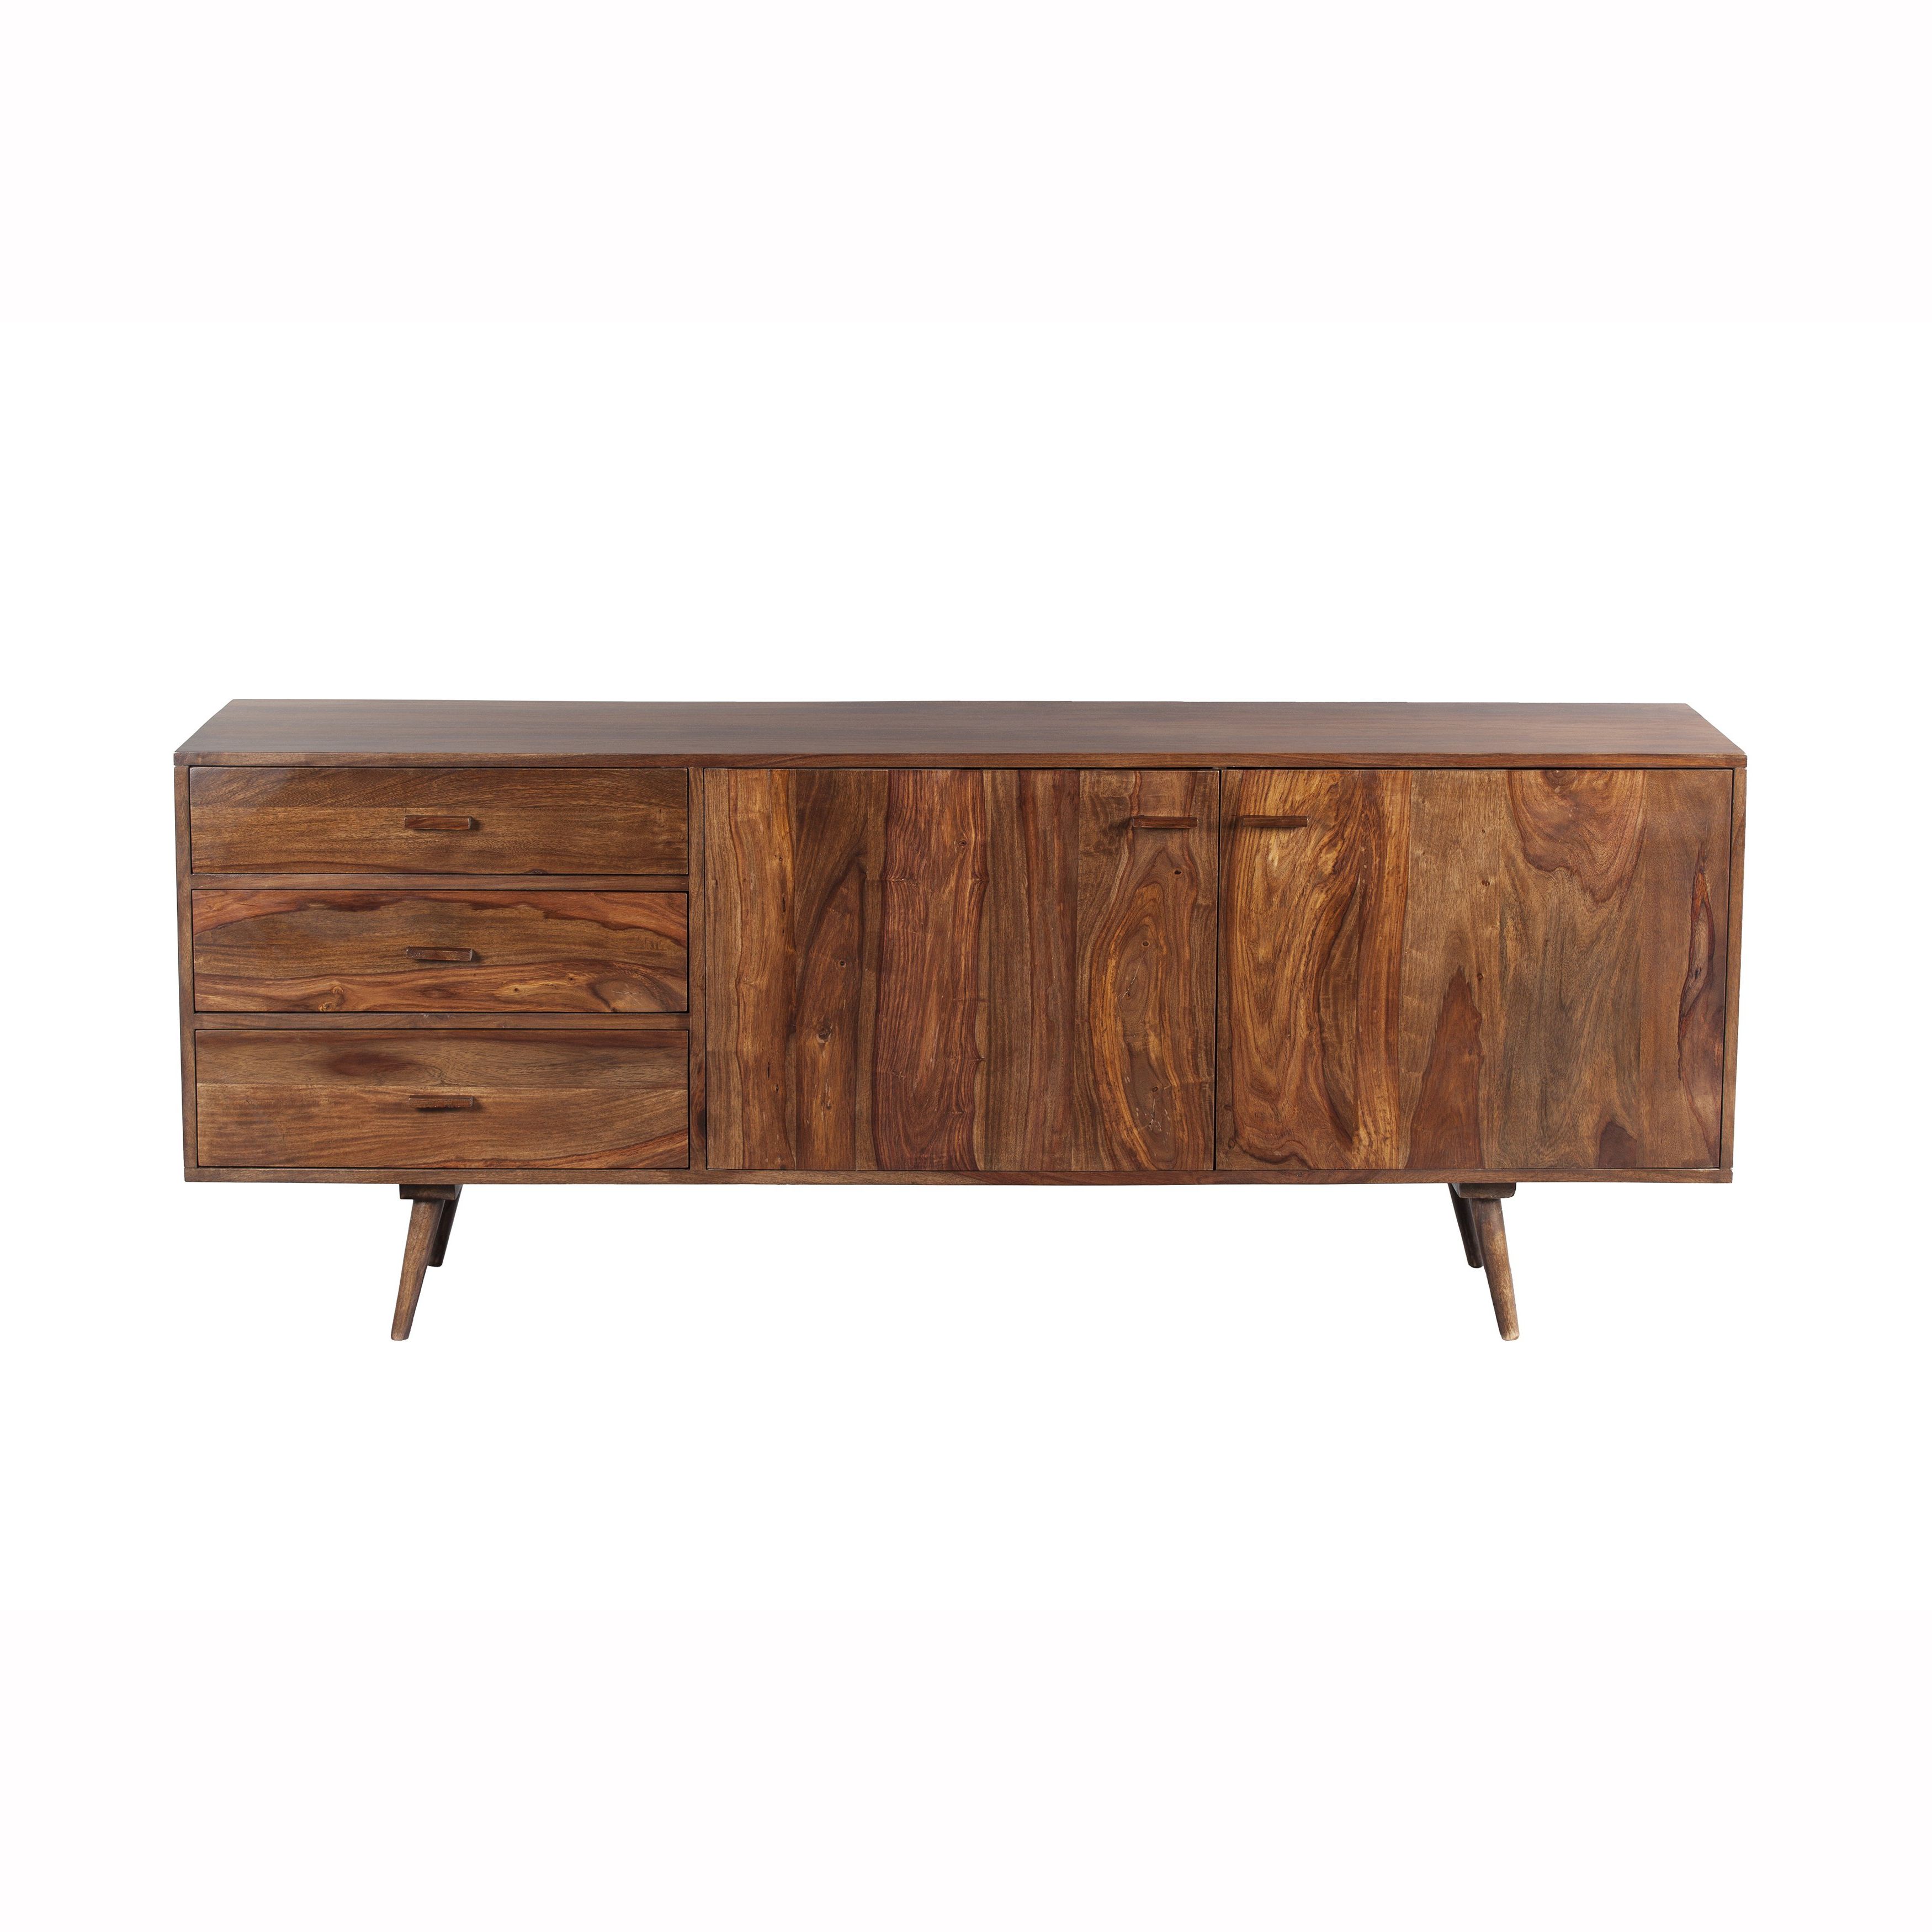 Best And Newest Mandara 3 Drawer 2 Door Sideboards With Regard To Mandara Handcrafted Solid Sheesham Wood Mid Century Console – 70x18x (View 8 of 20)